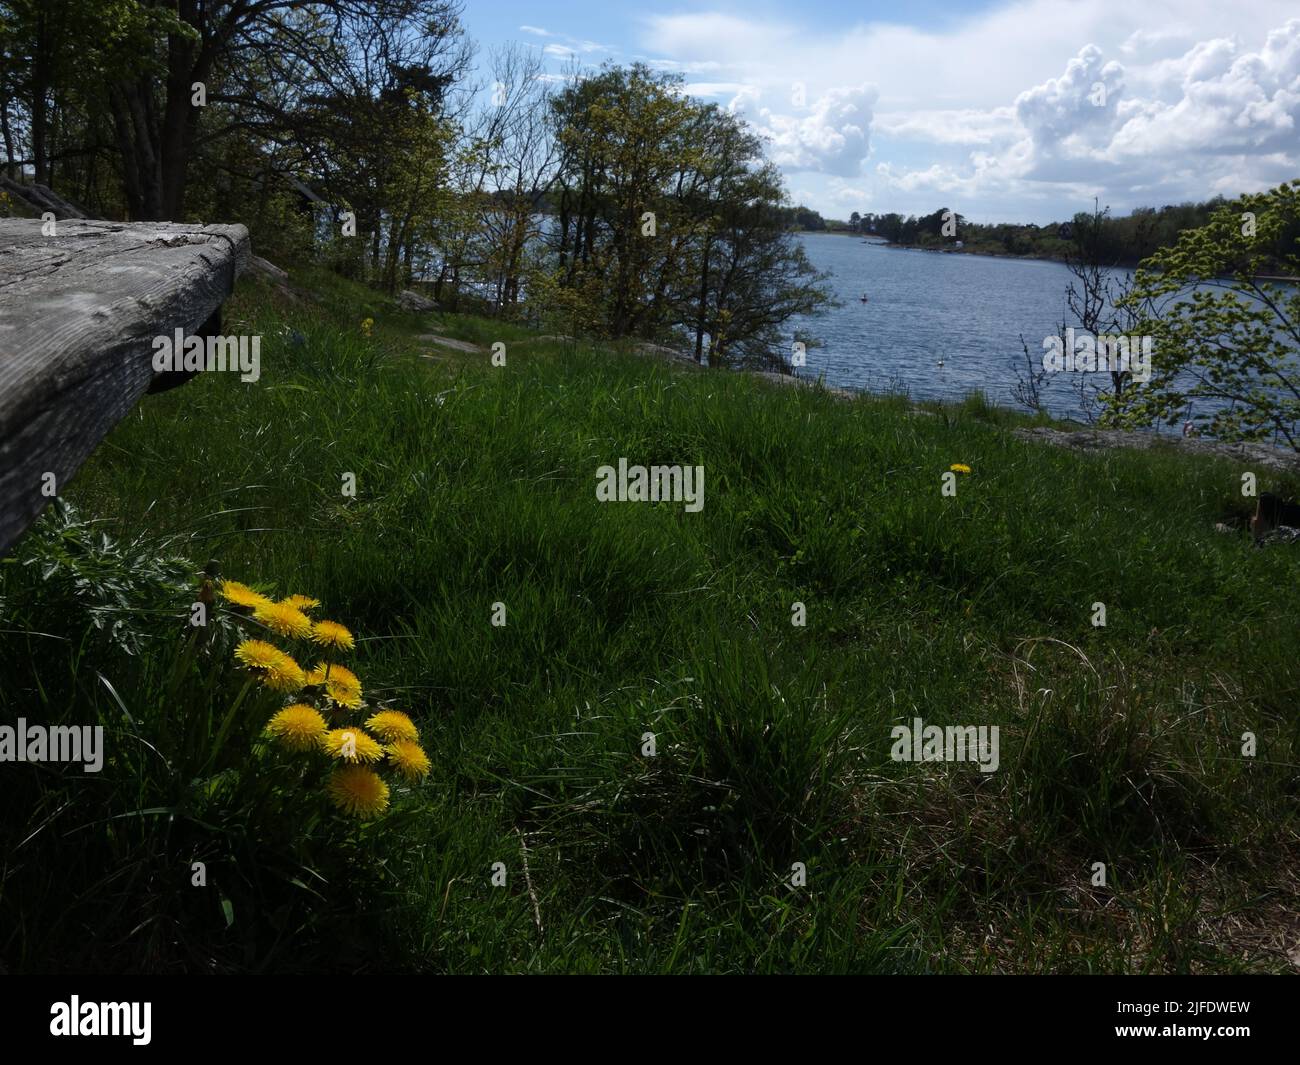 The dandelion peeks out from an old bench and extends over the green fresh grass. The island of Kollen can be seen on the other side of Larkollsundet. Stock Photo